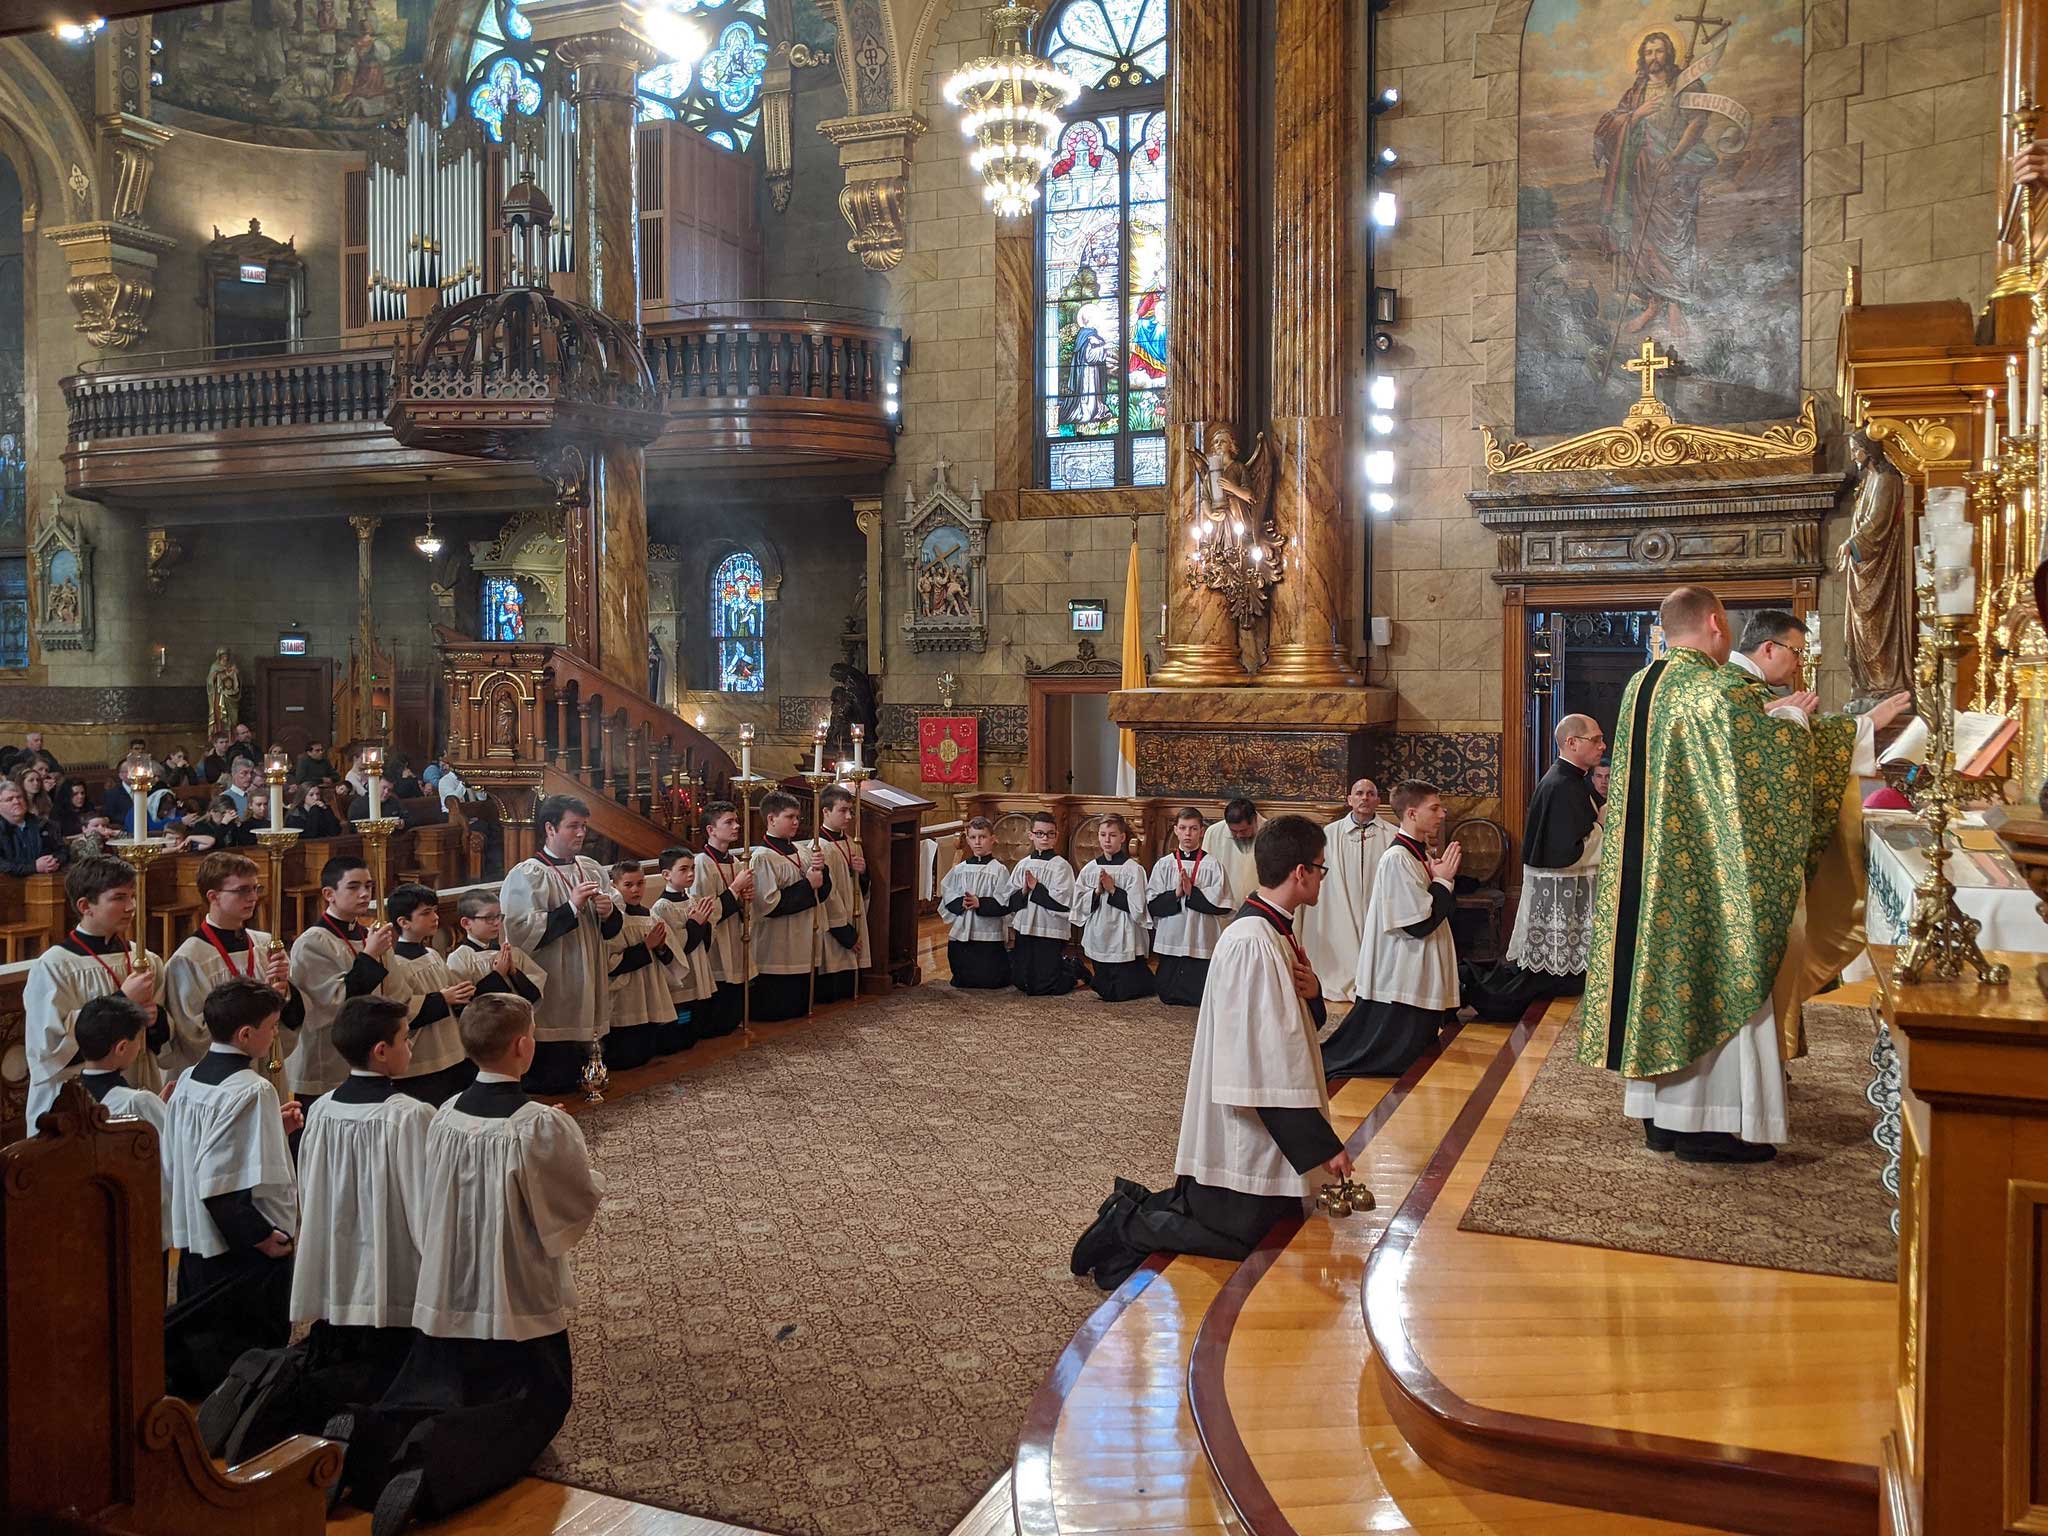 Mass at St John Cantius in Chicago